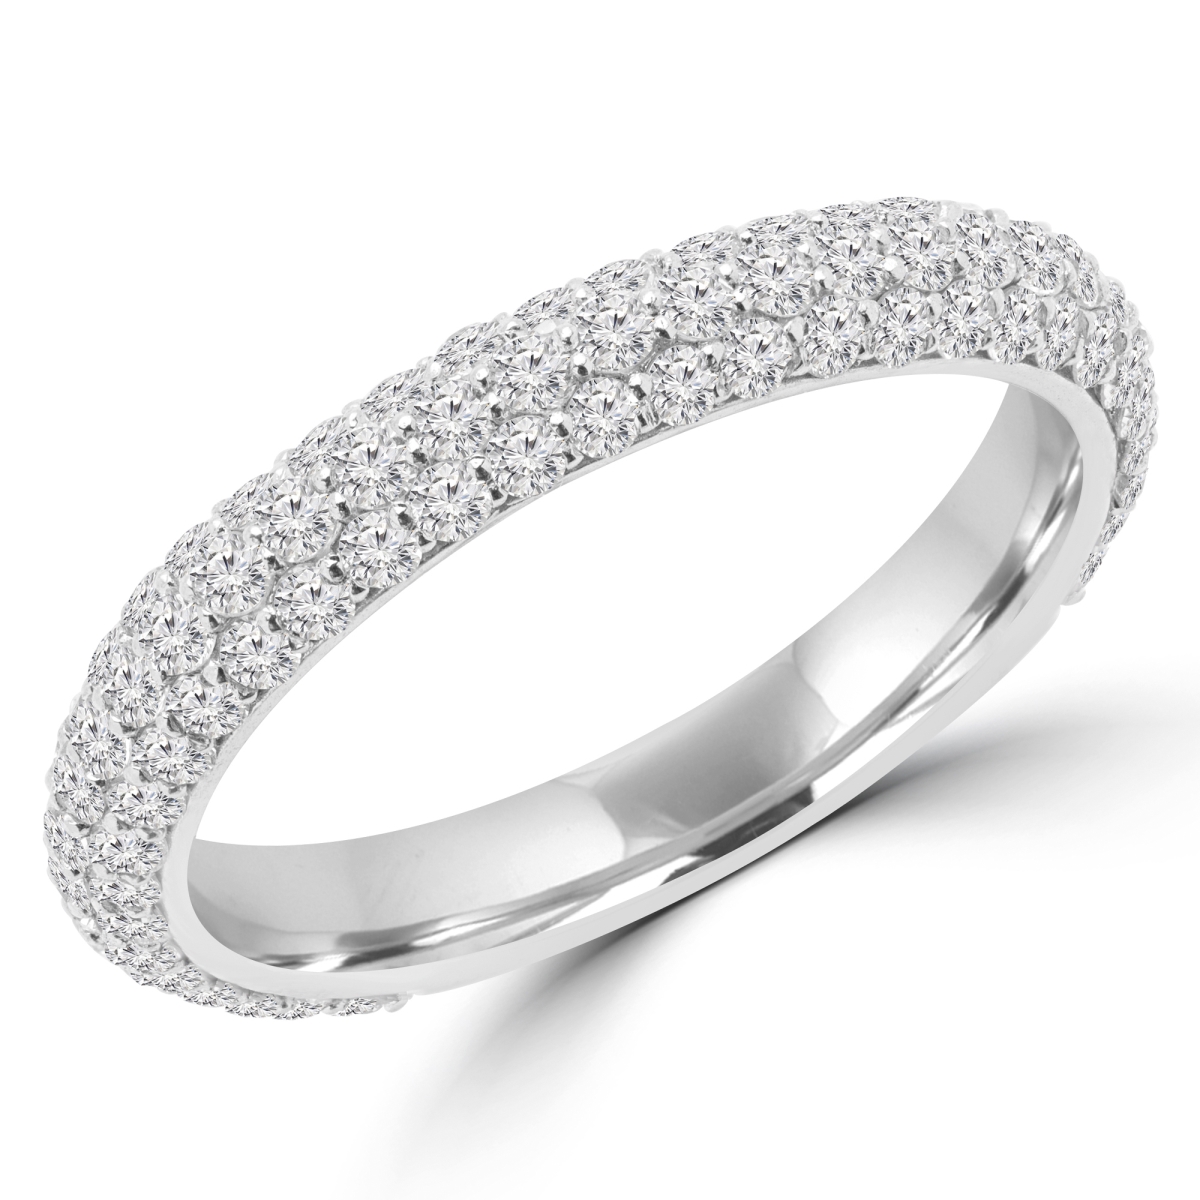 Picture of Majesty Diamonds MD170166-8.5 1.1 CTW Round Diamond Semi-Eternity Wedding Band Ring in 14K White Gold - 8.5